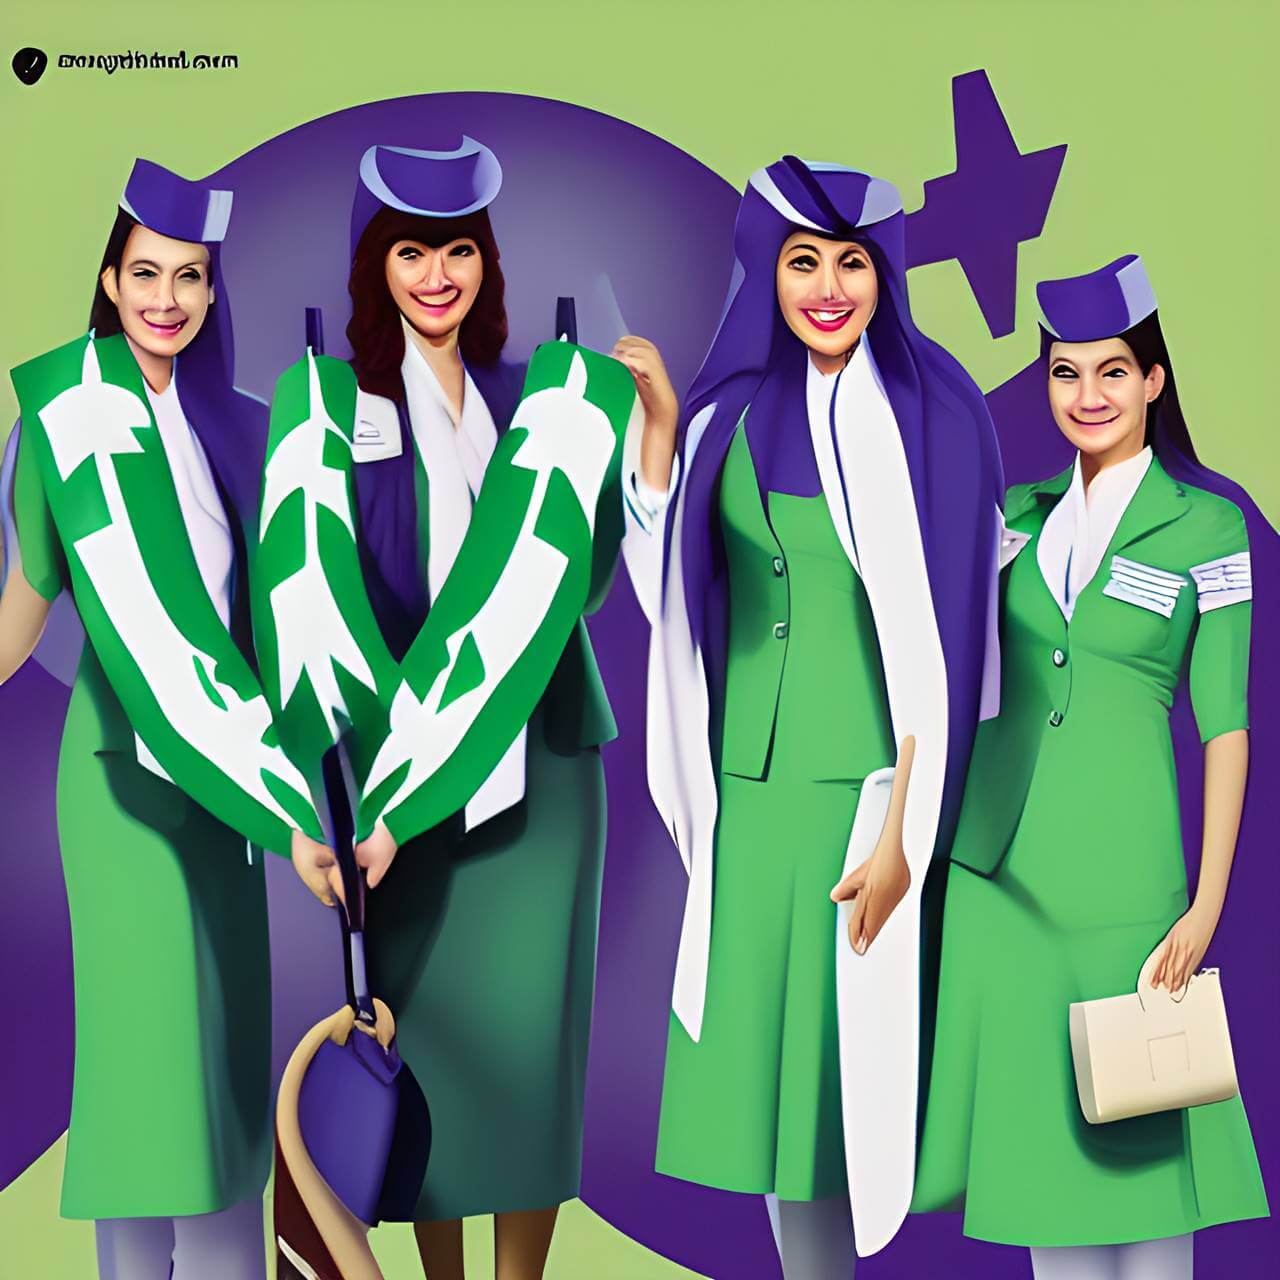 How to become a cabin crew in Saudi Arabia